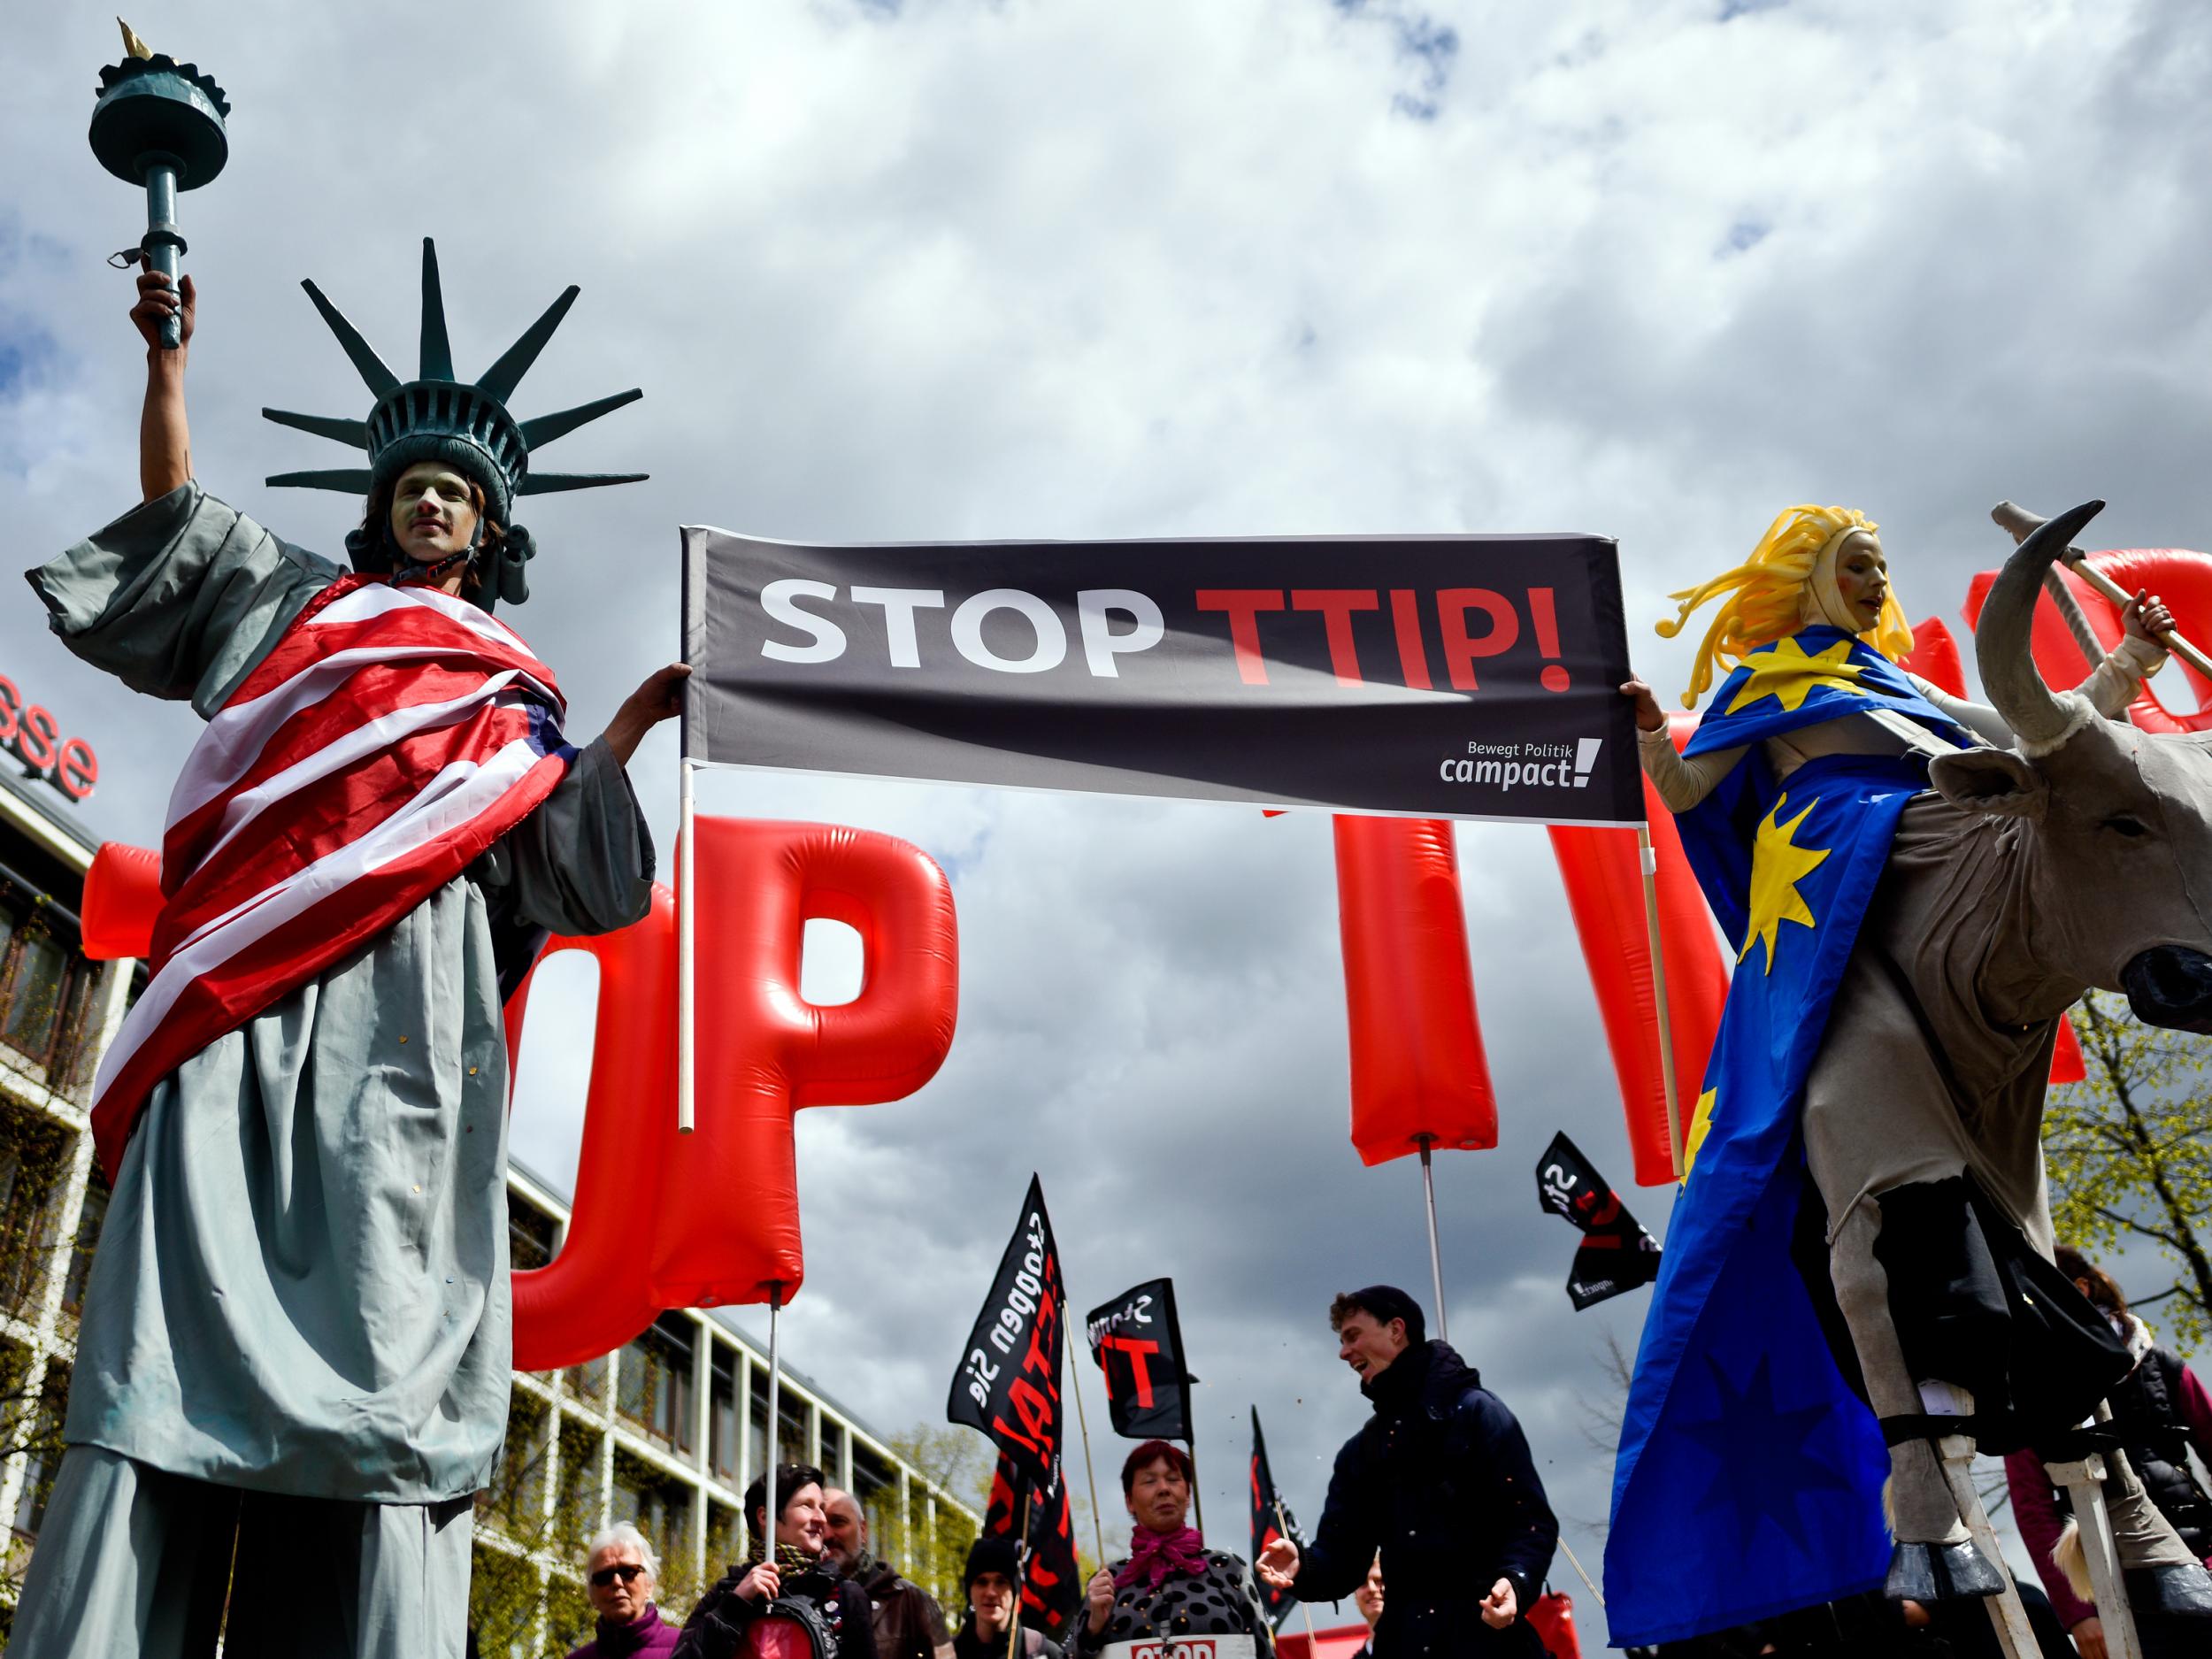 Anti-TTIP protests have brought thousands onto the streets across Europe, while the TISA talks have gone largely unnoticed